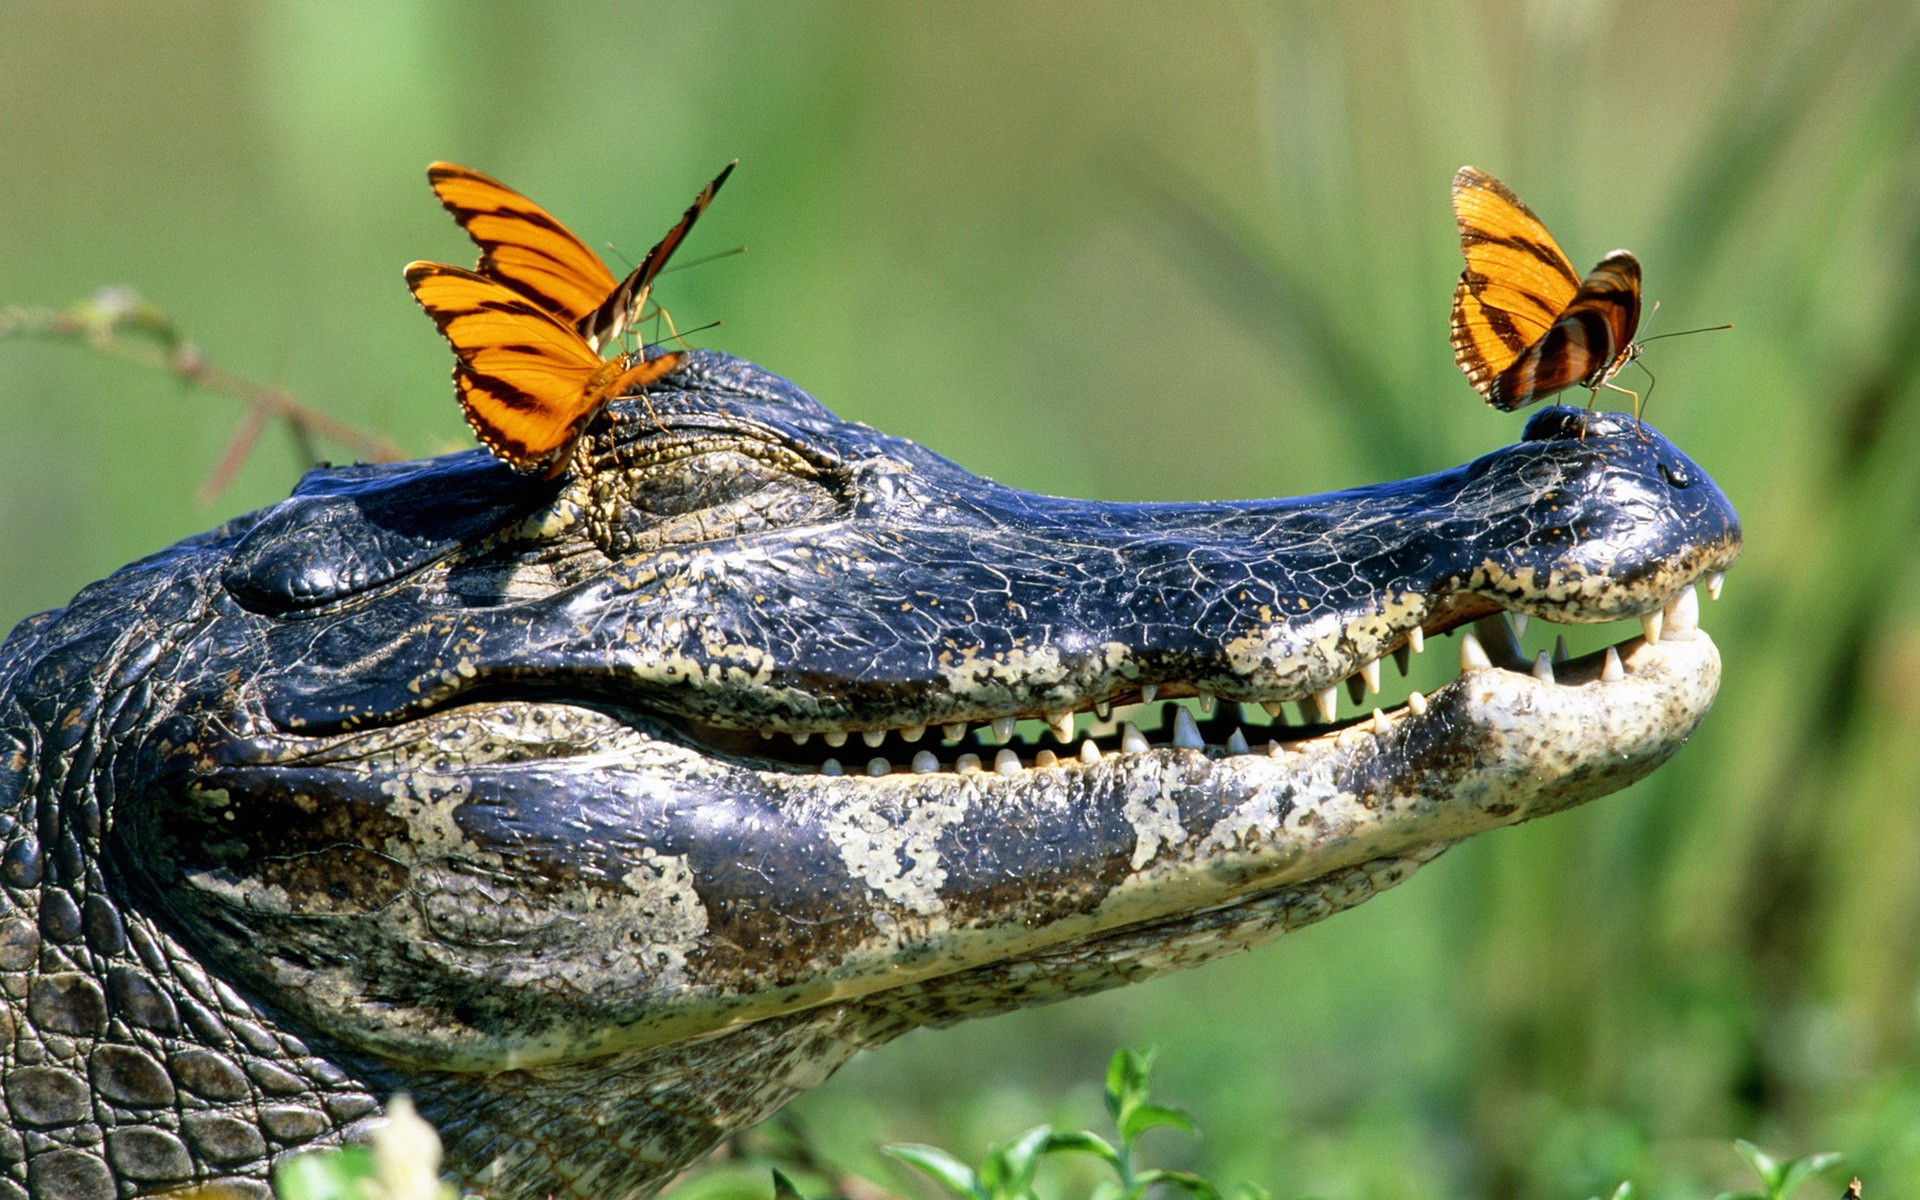 Insects Crocodiles Jaws Reptiles Butterflies Wallpaper